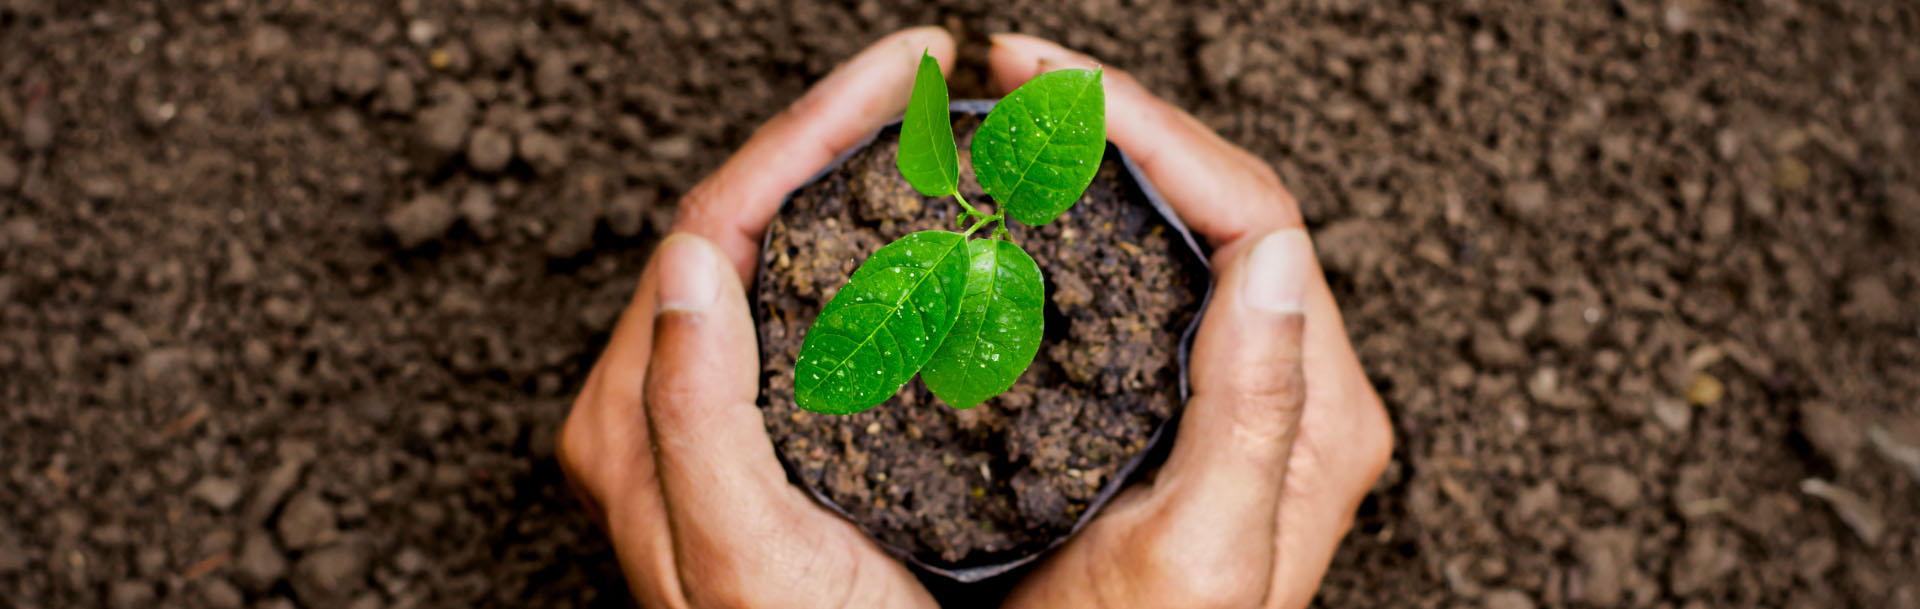 two hands holding a pot with soil in which a green plant with water drops on the leaves is growing